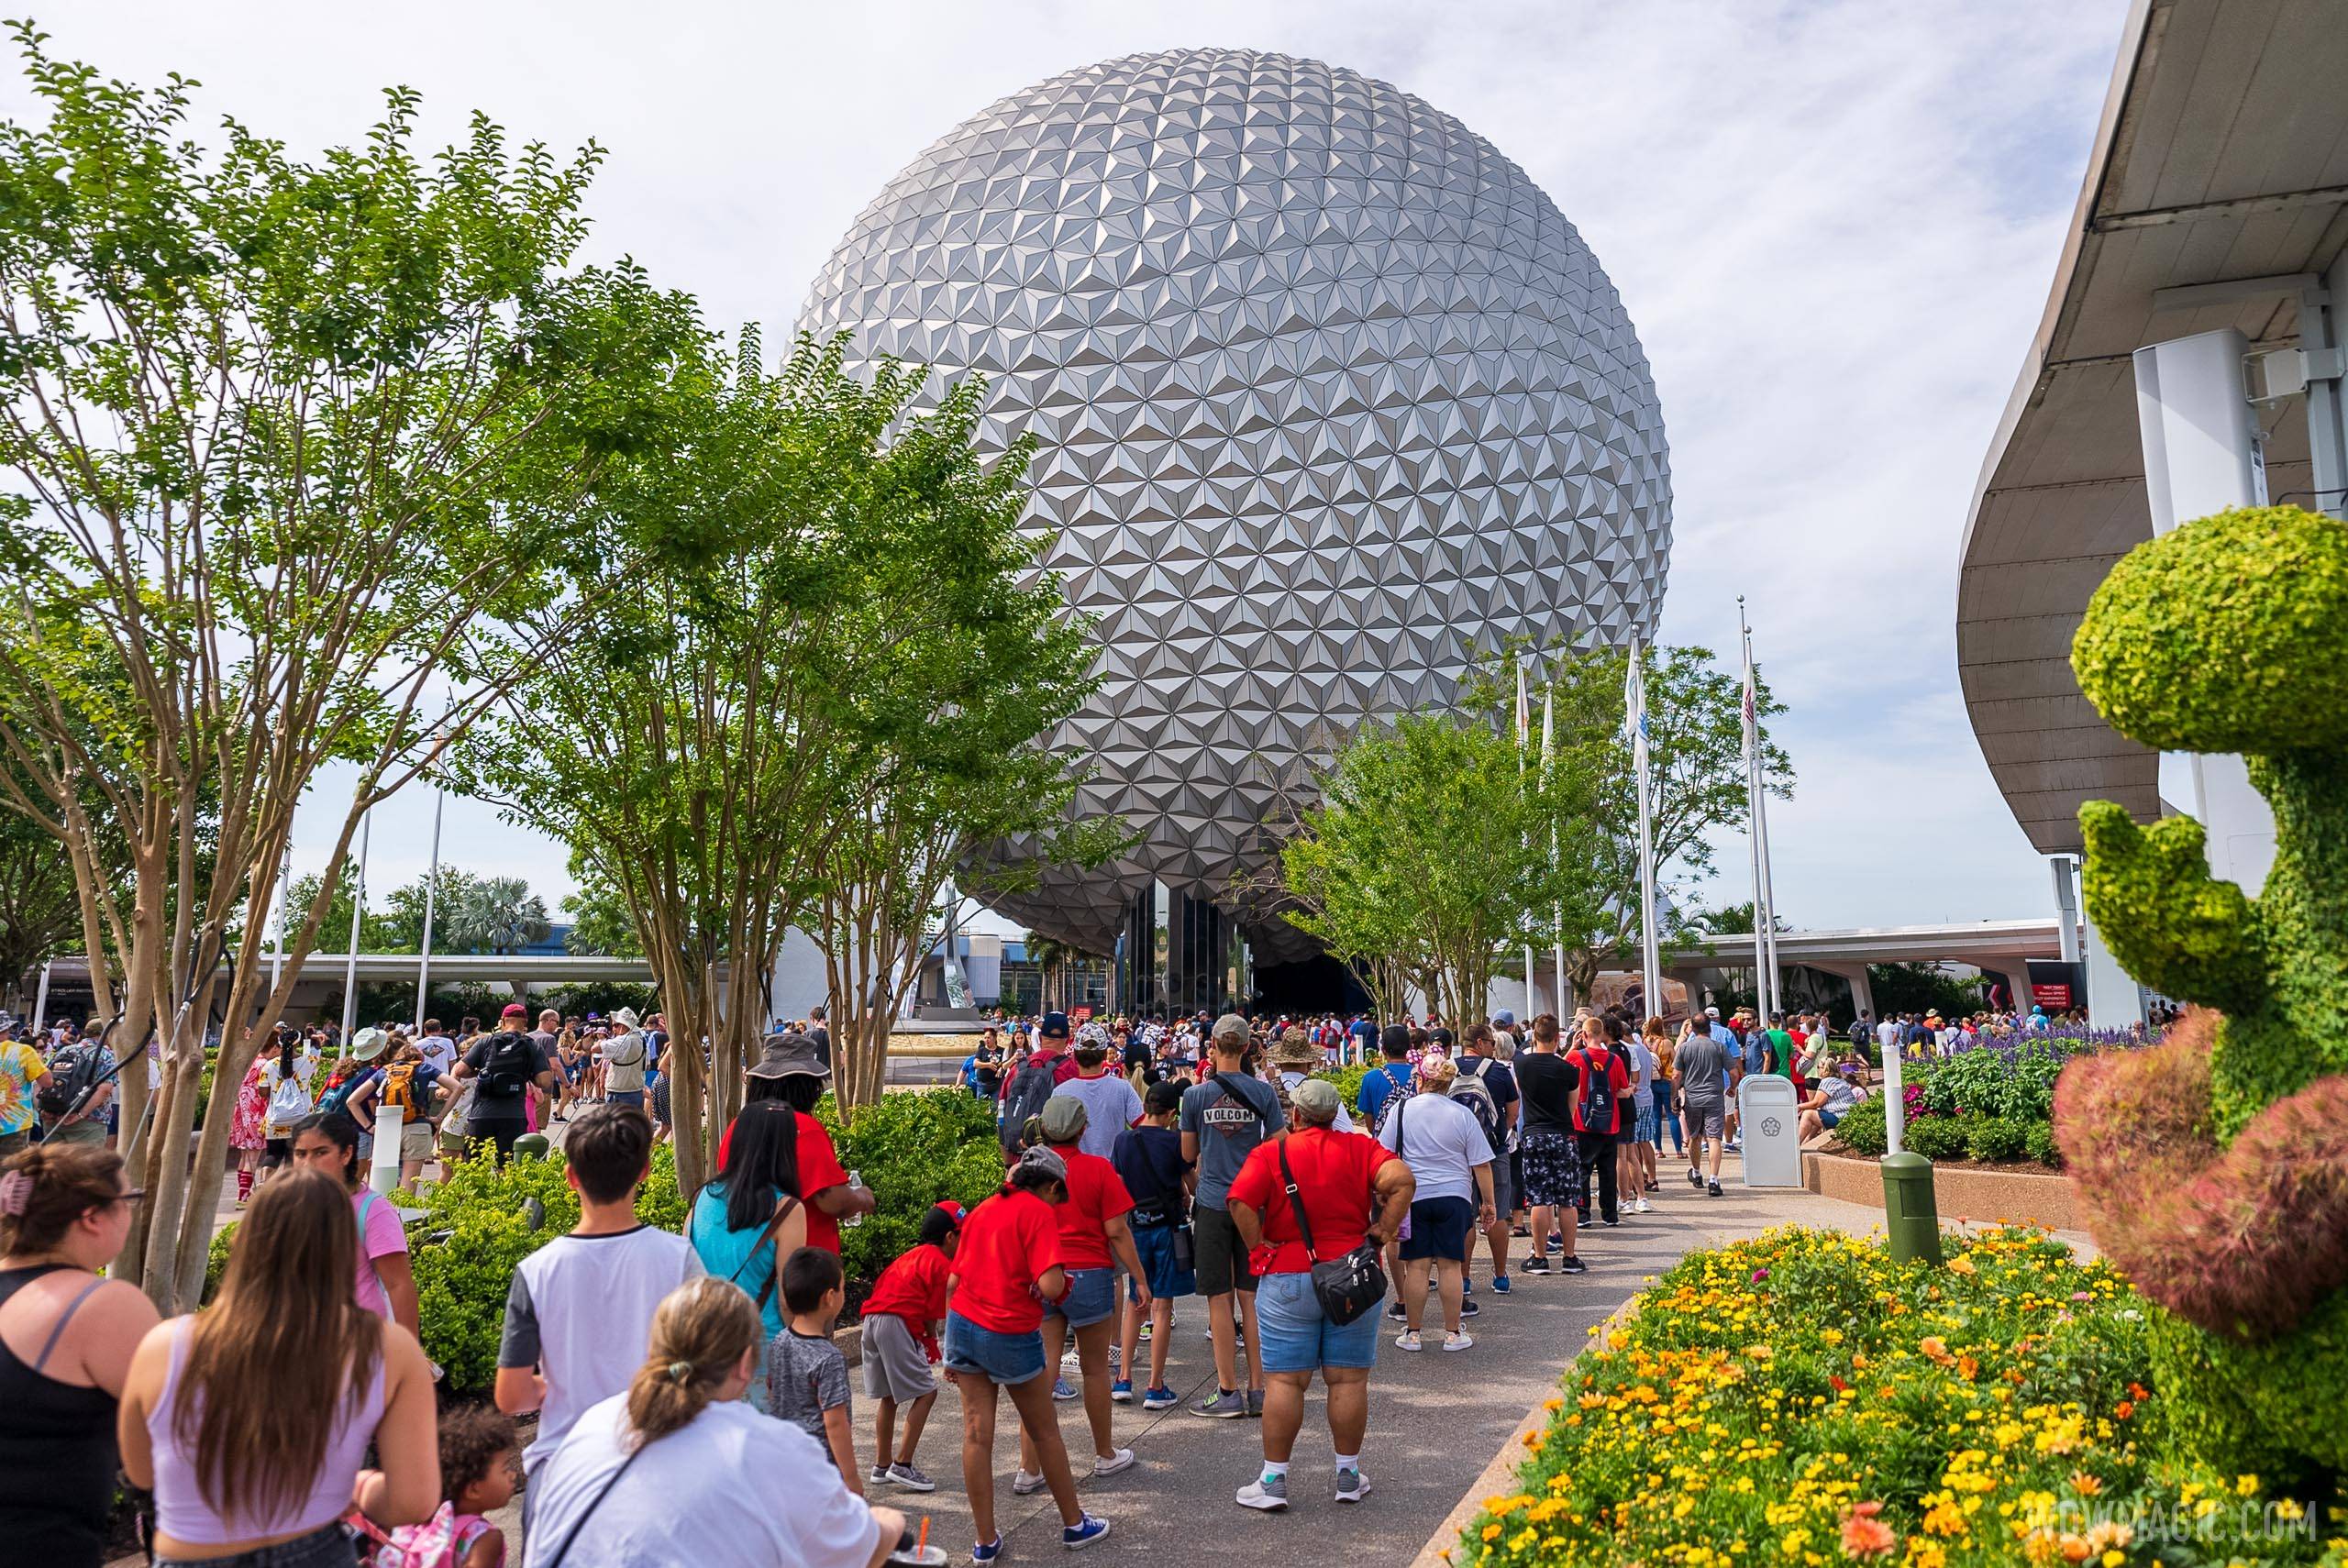 The crowds are back at Walt Disney World and the parks look much more like their old self